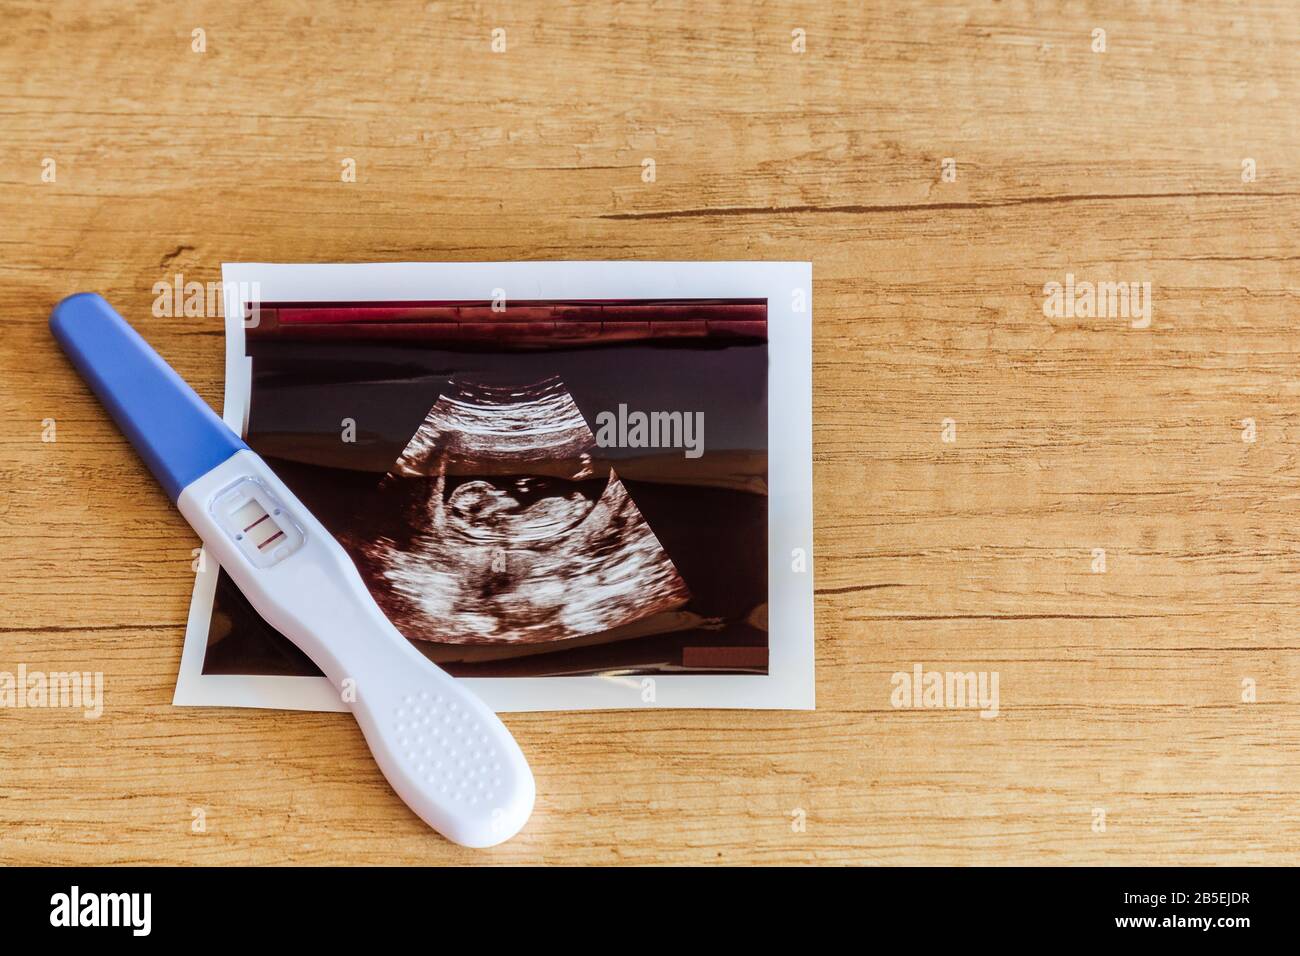 Pregnancy test showing a positive result and ultrasound image isolated on wooden background. Stock Photo